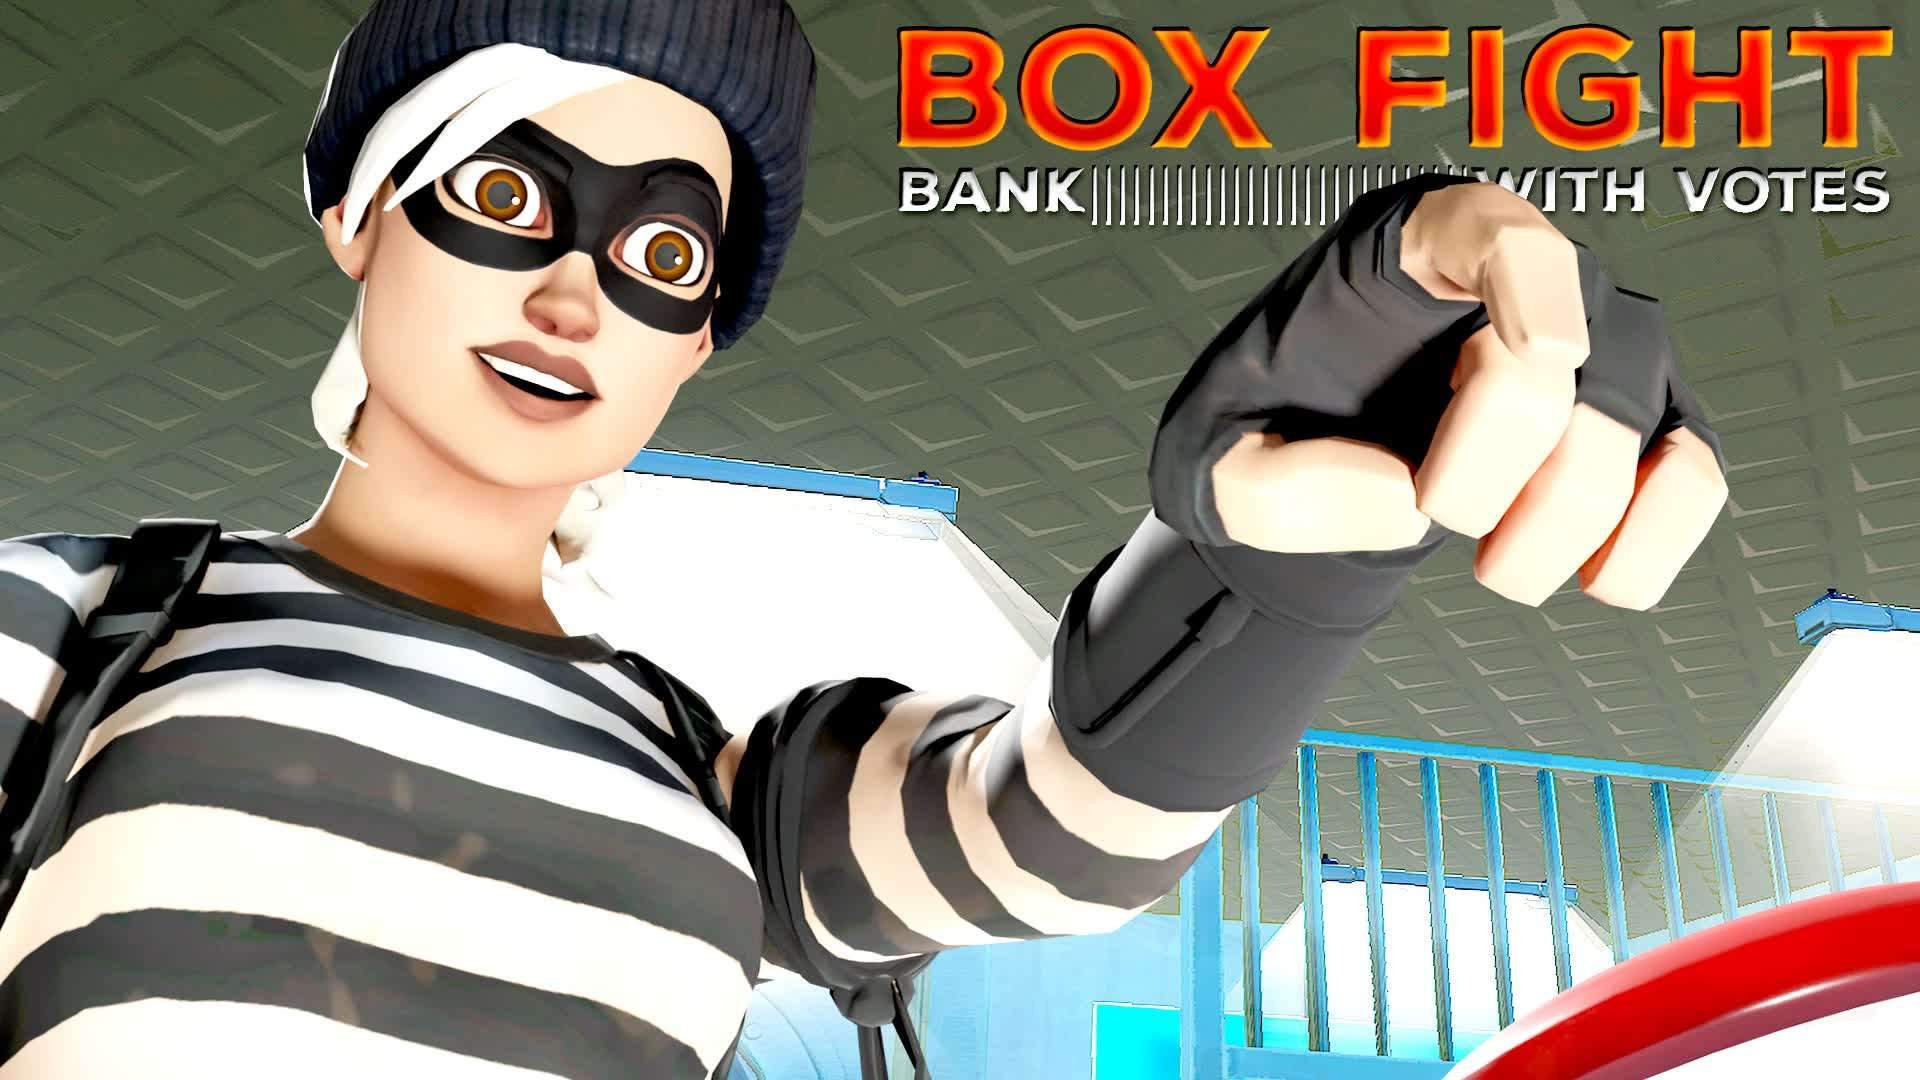 🏦BOX FIGHT: BANK | with votes 🗳️